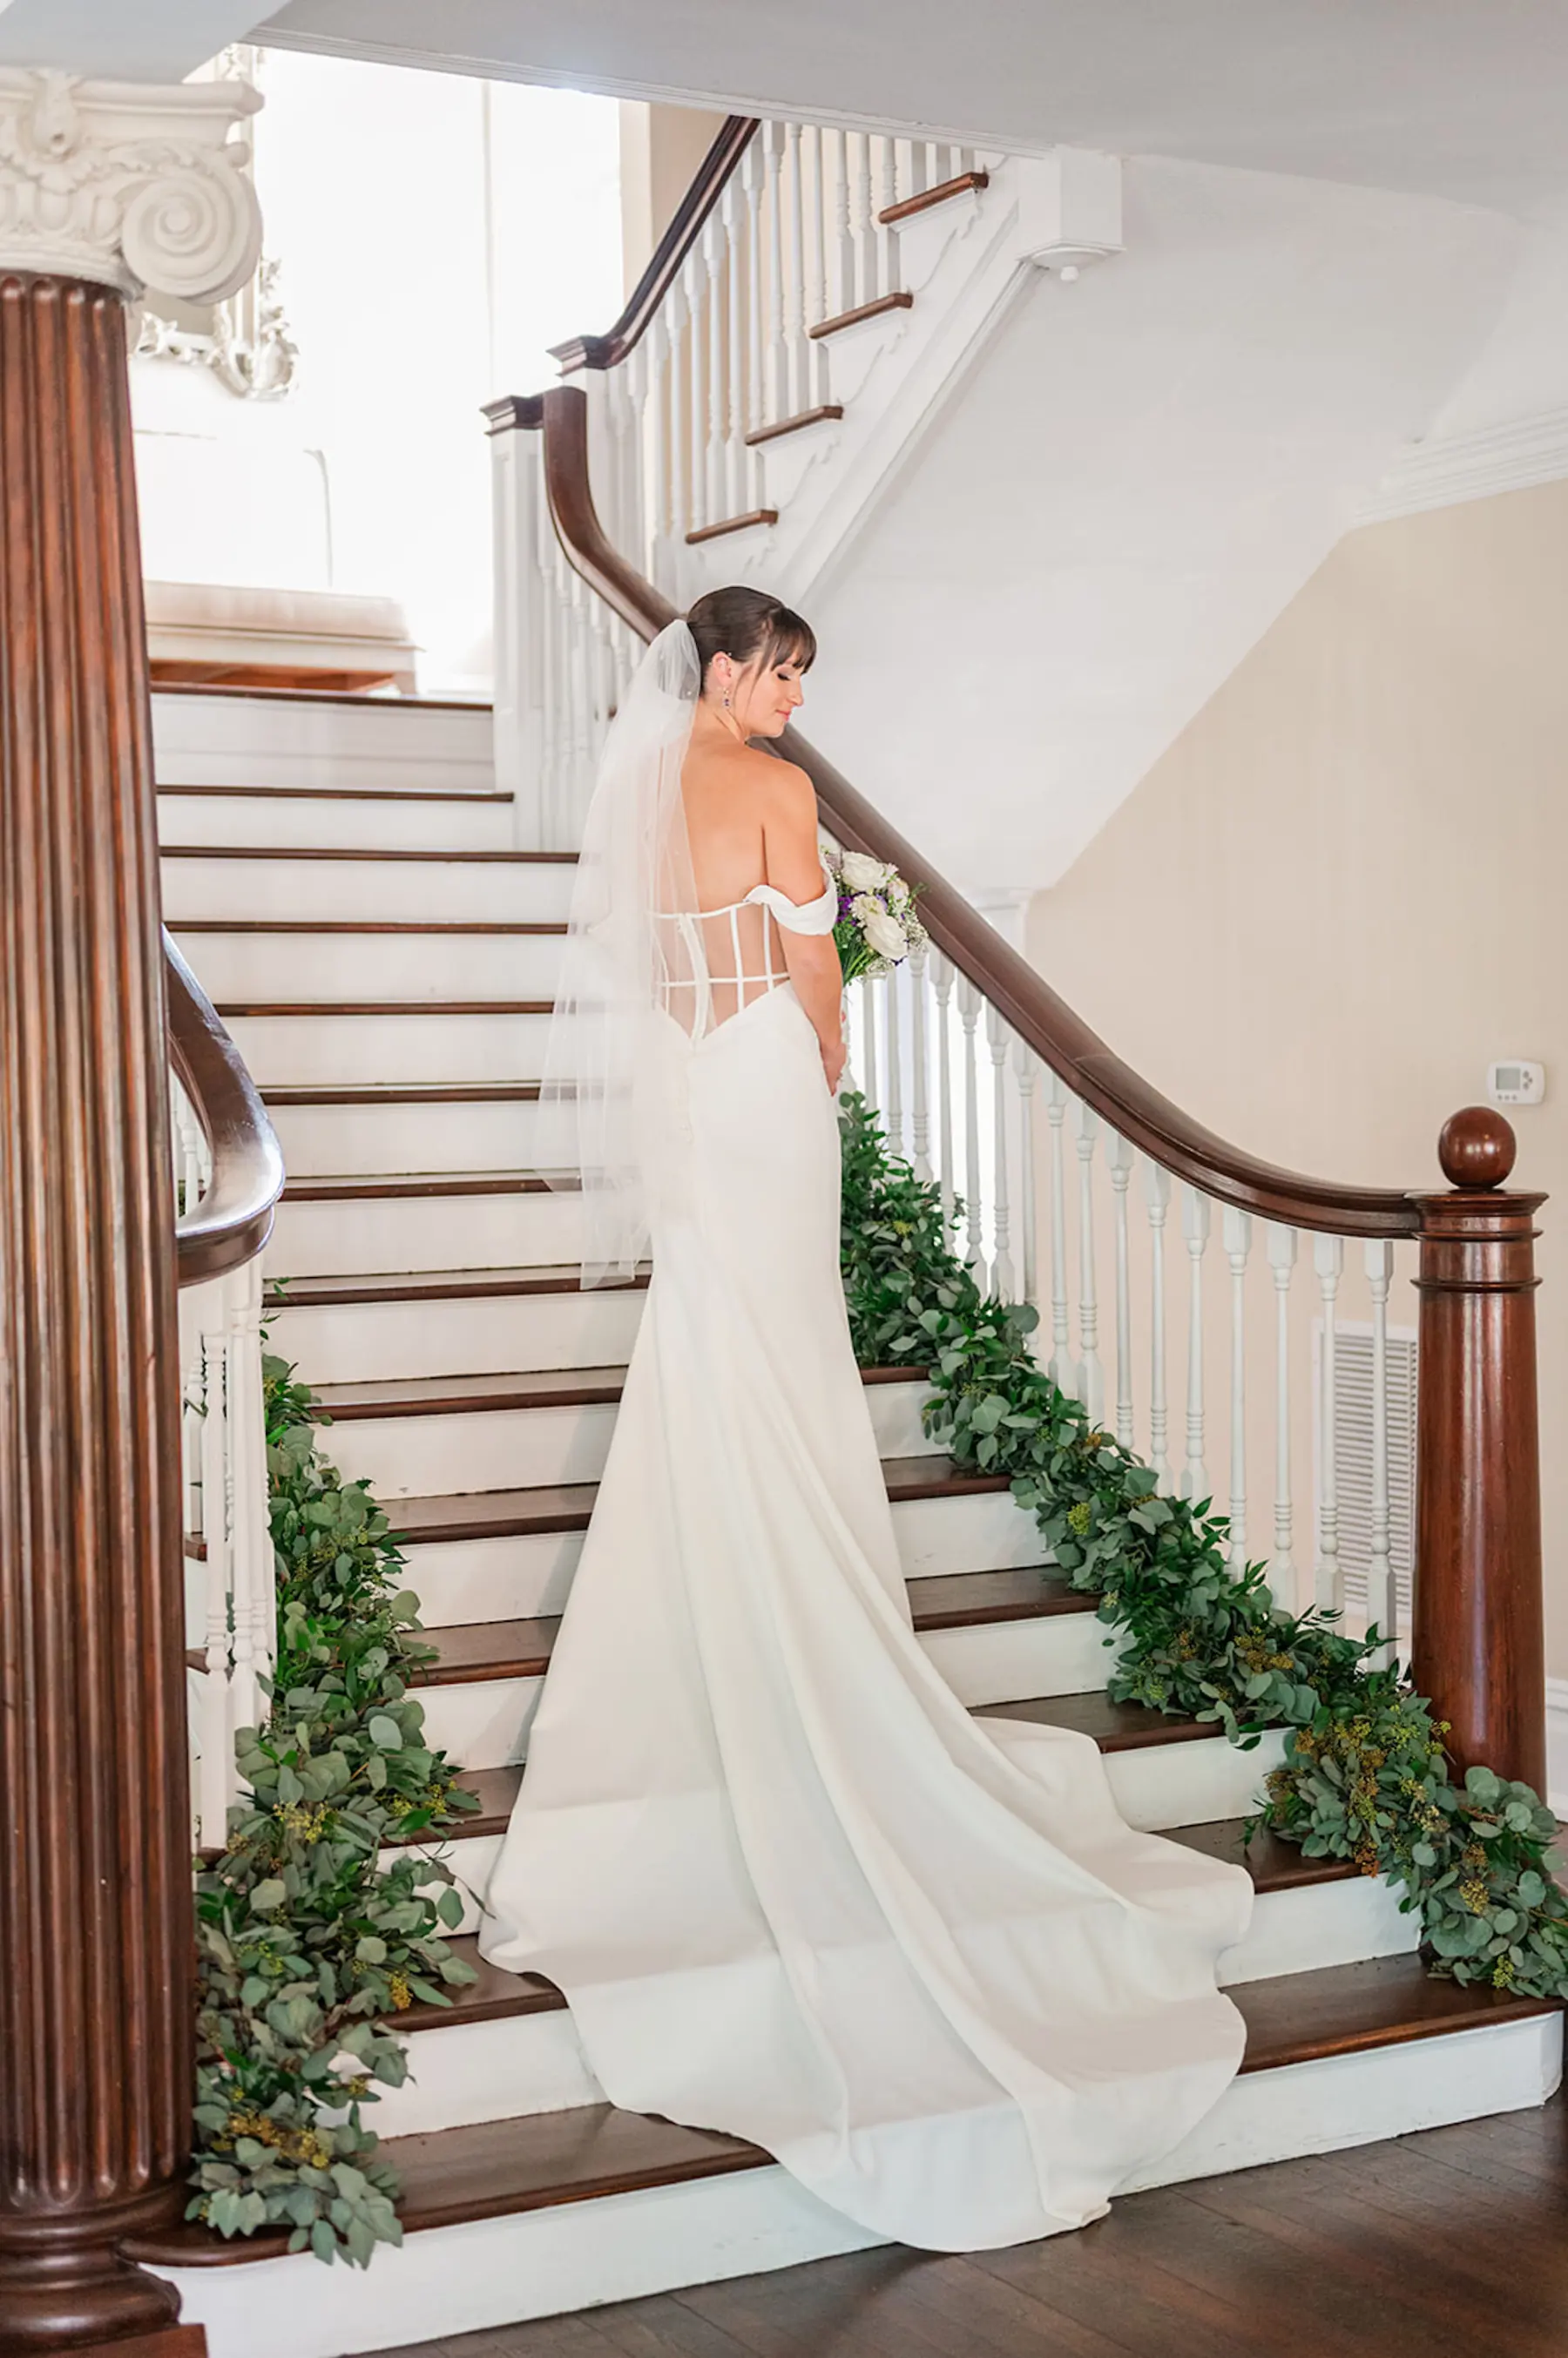 Elegant Sweetheart Wedding Dress with off the Shoulder Straps Ideas | South Tampa Photographer Eddy Almaguer Photography | Venue The Orlo House